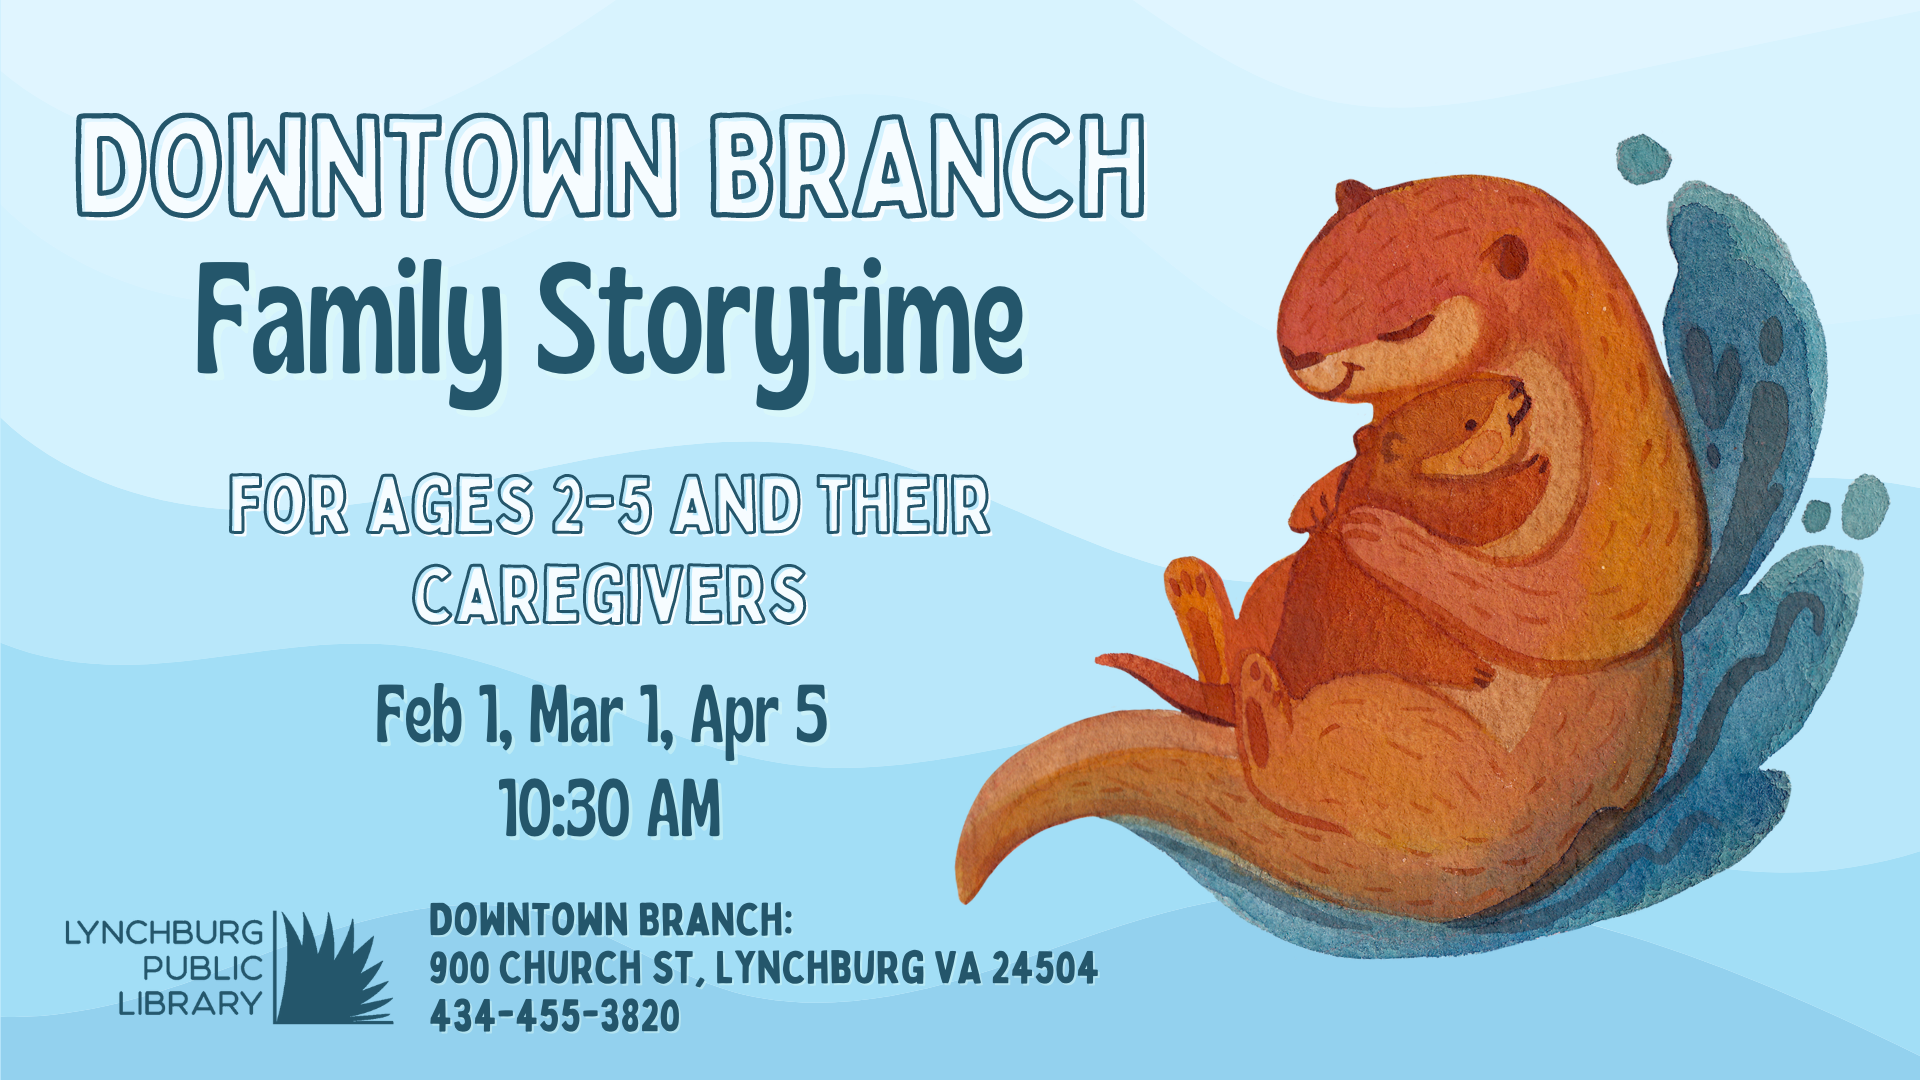 Image of parent and child otters alongside information about LPL's Downtown Branch spring 2023 storytimes